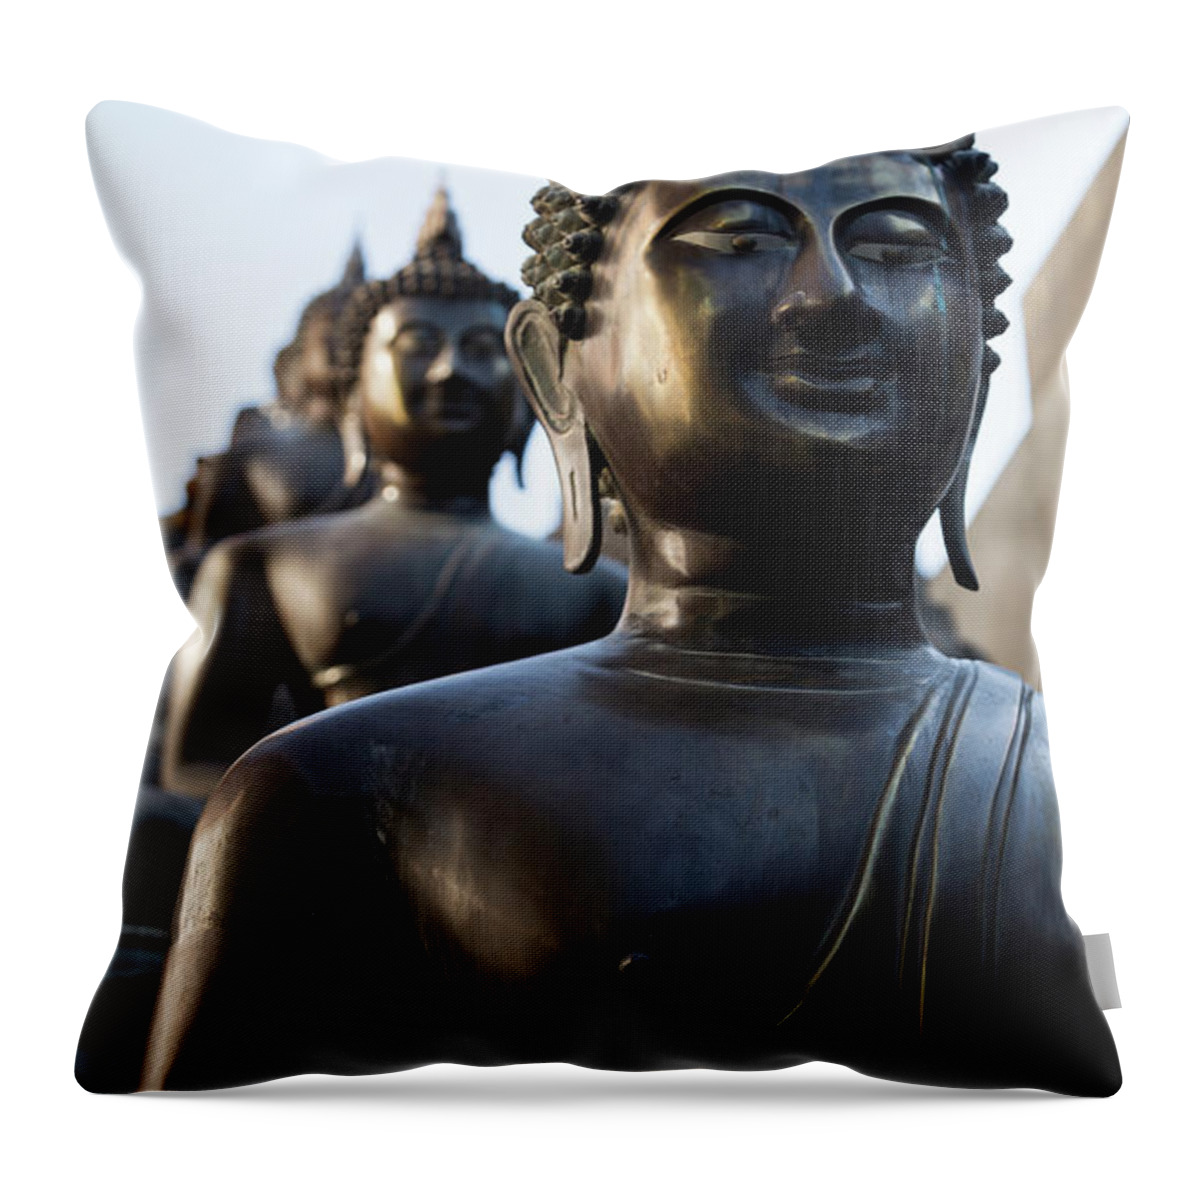 Statue Throw Pillow featuring the photograph Buddha Statues In Gangaramaya Temple by @ Didier Marti